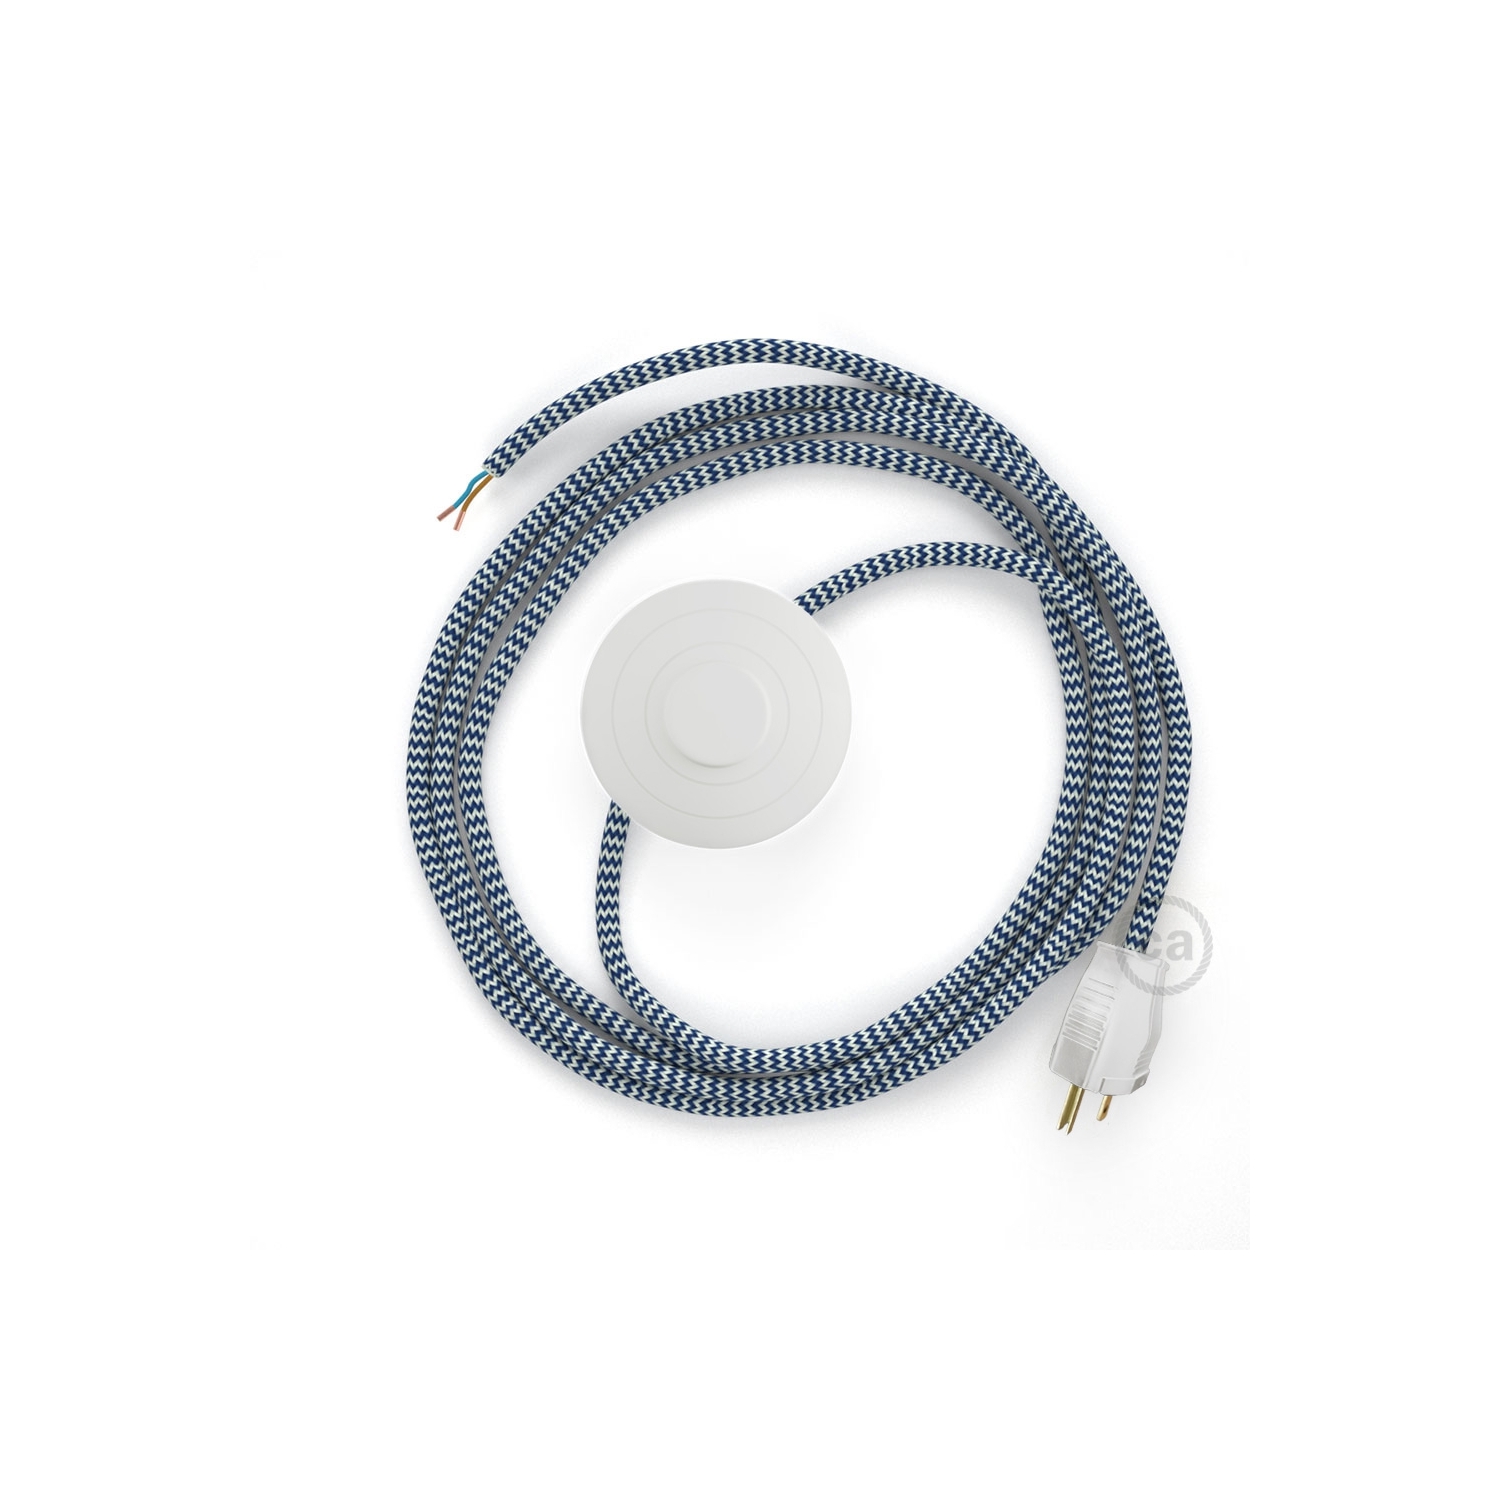 Power Cord with foot switch, RZ12 Blue & White Chevron - Choose color of switch/plug